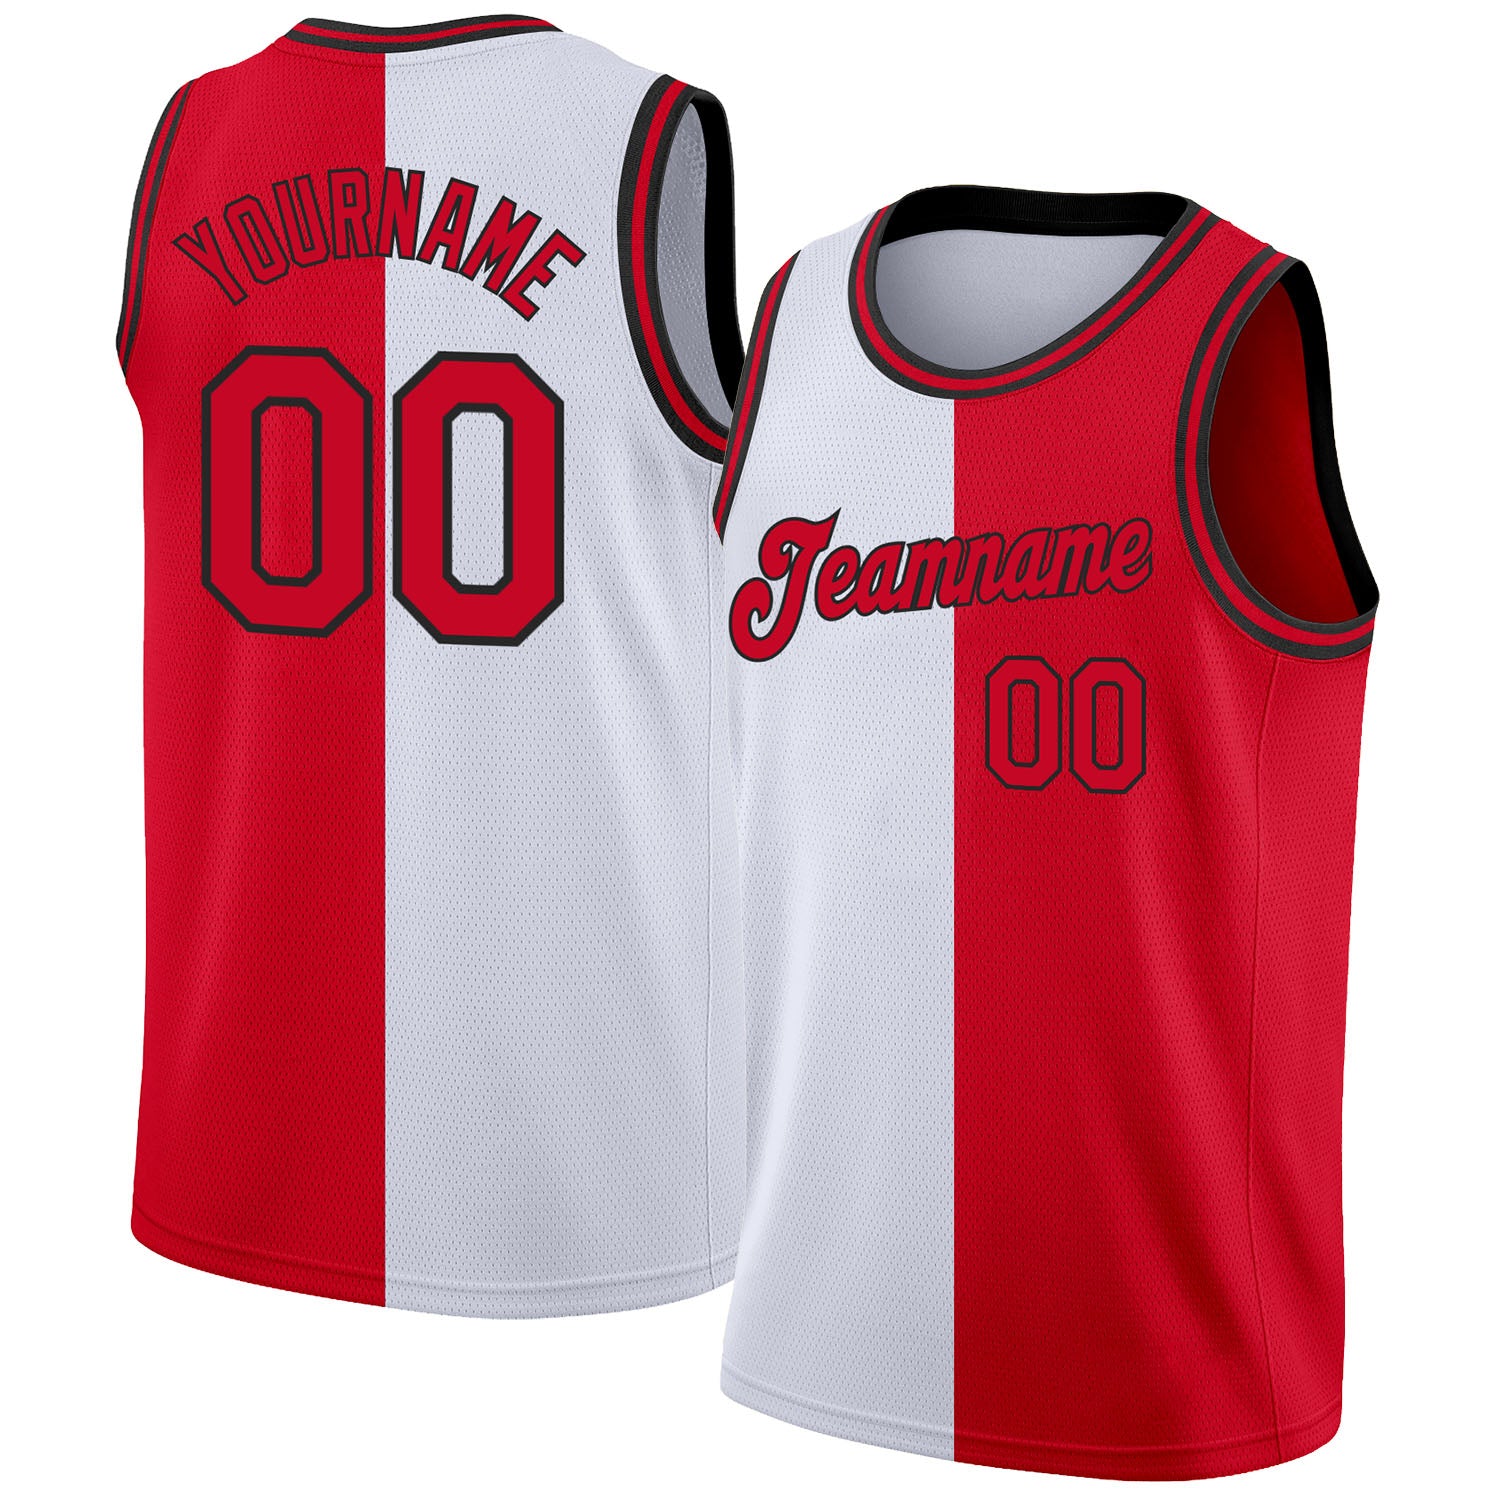 The Jersey Nation Red Black-White Custom Basketball Jersey - Youth S